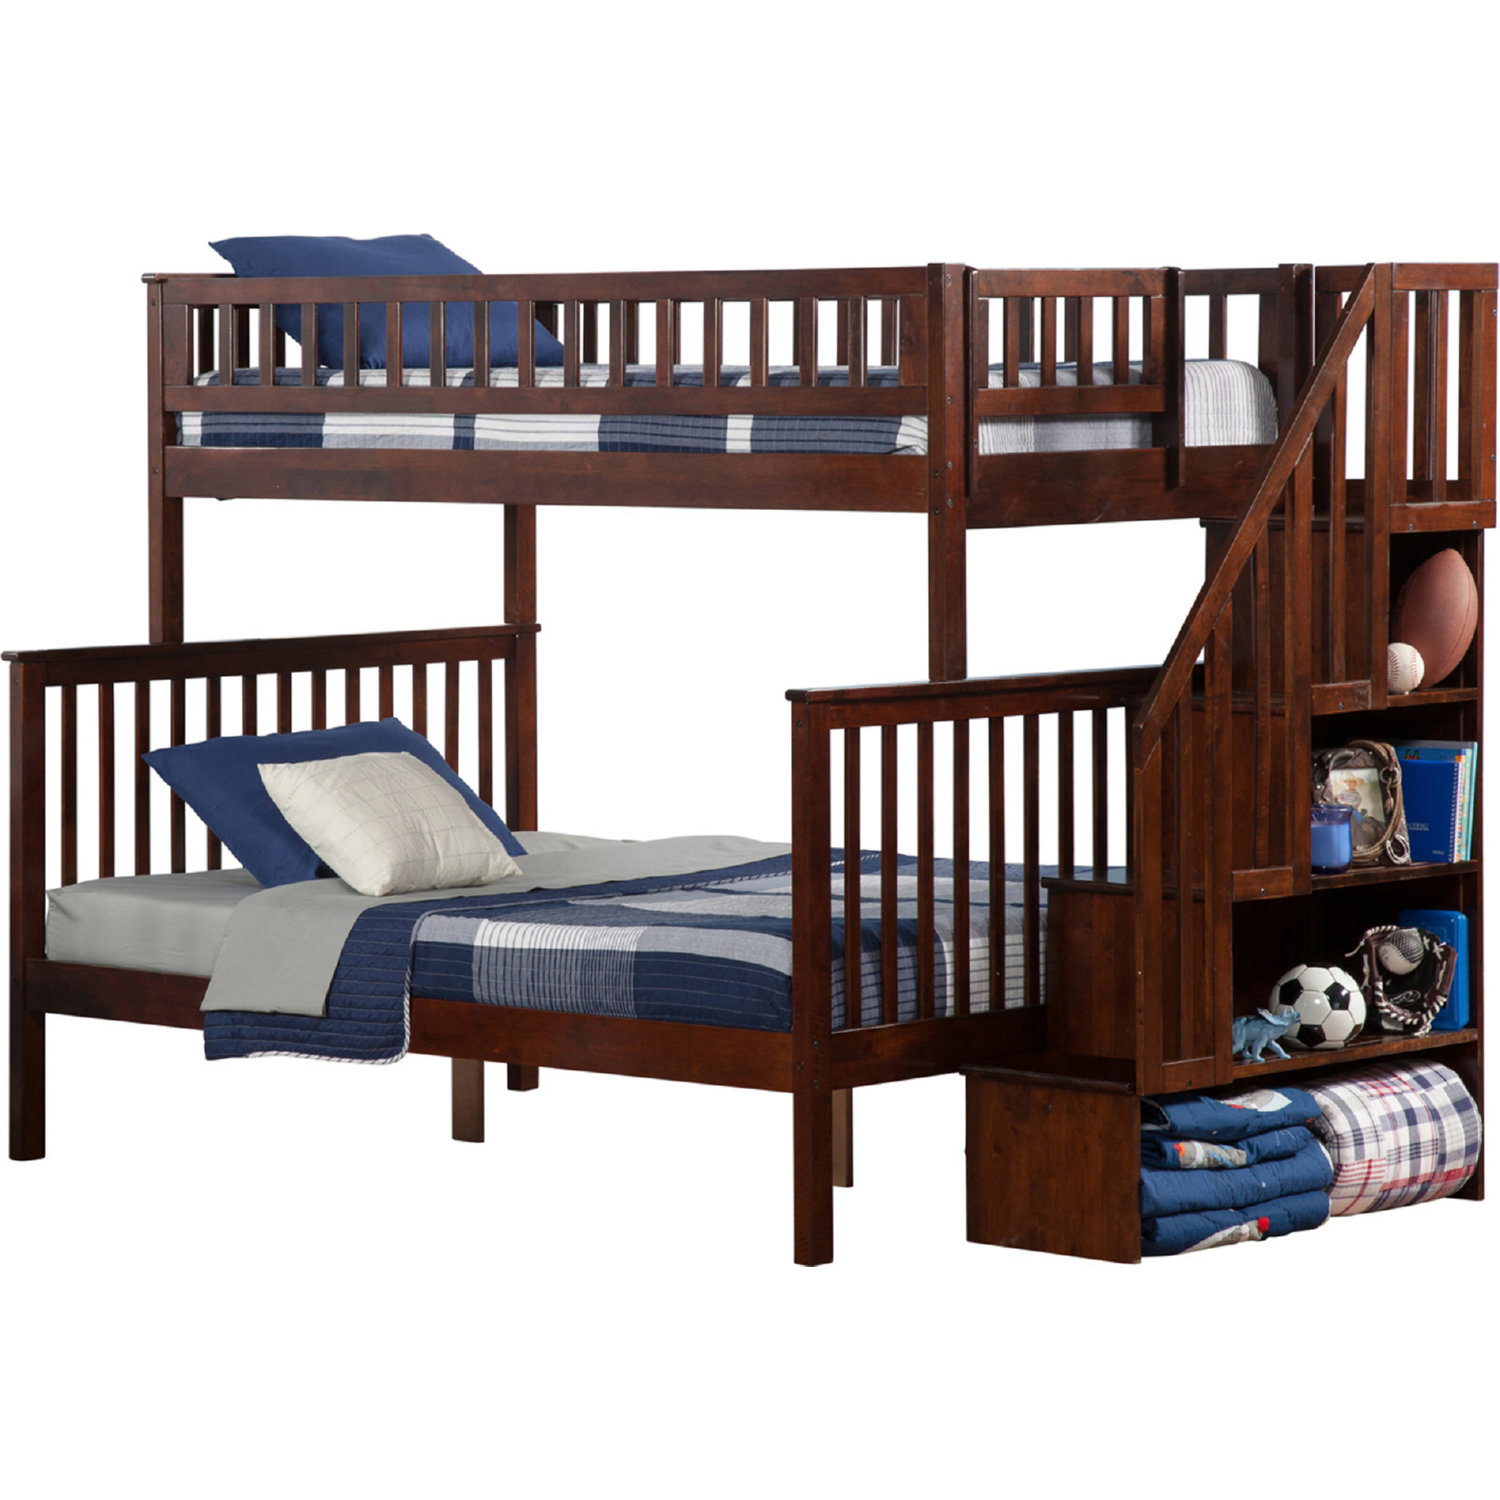 Woodland Staircase Bunk Bed Twin Over Full in Antique Walnut